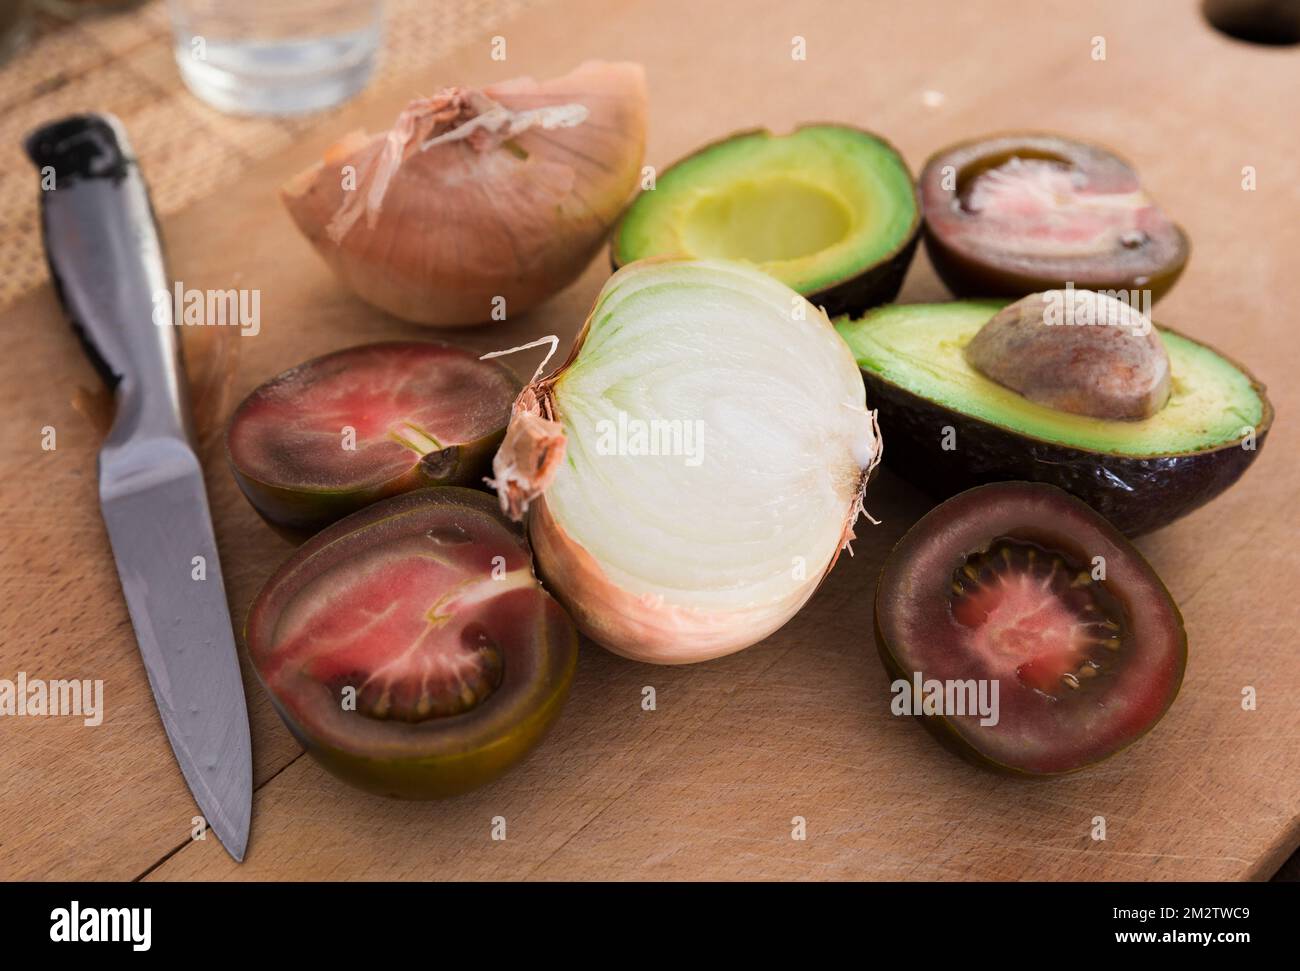 vegetables black tomatoes, avocado and onions on wooden board Stock Photo